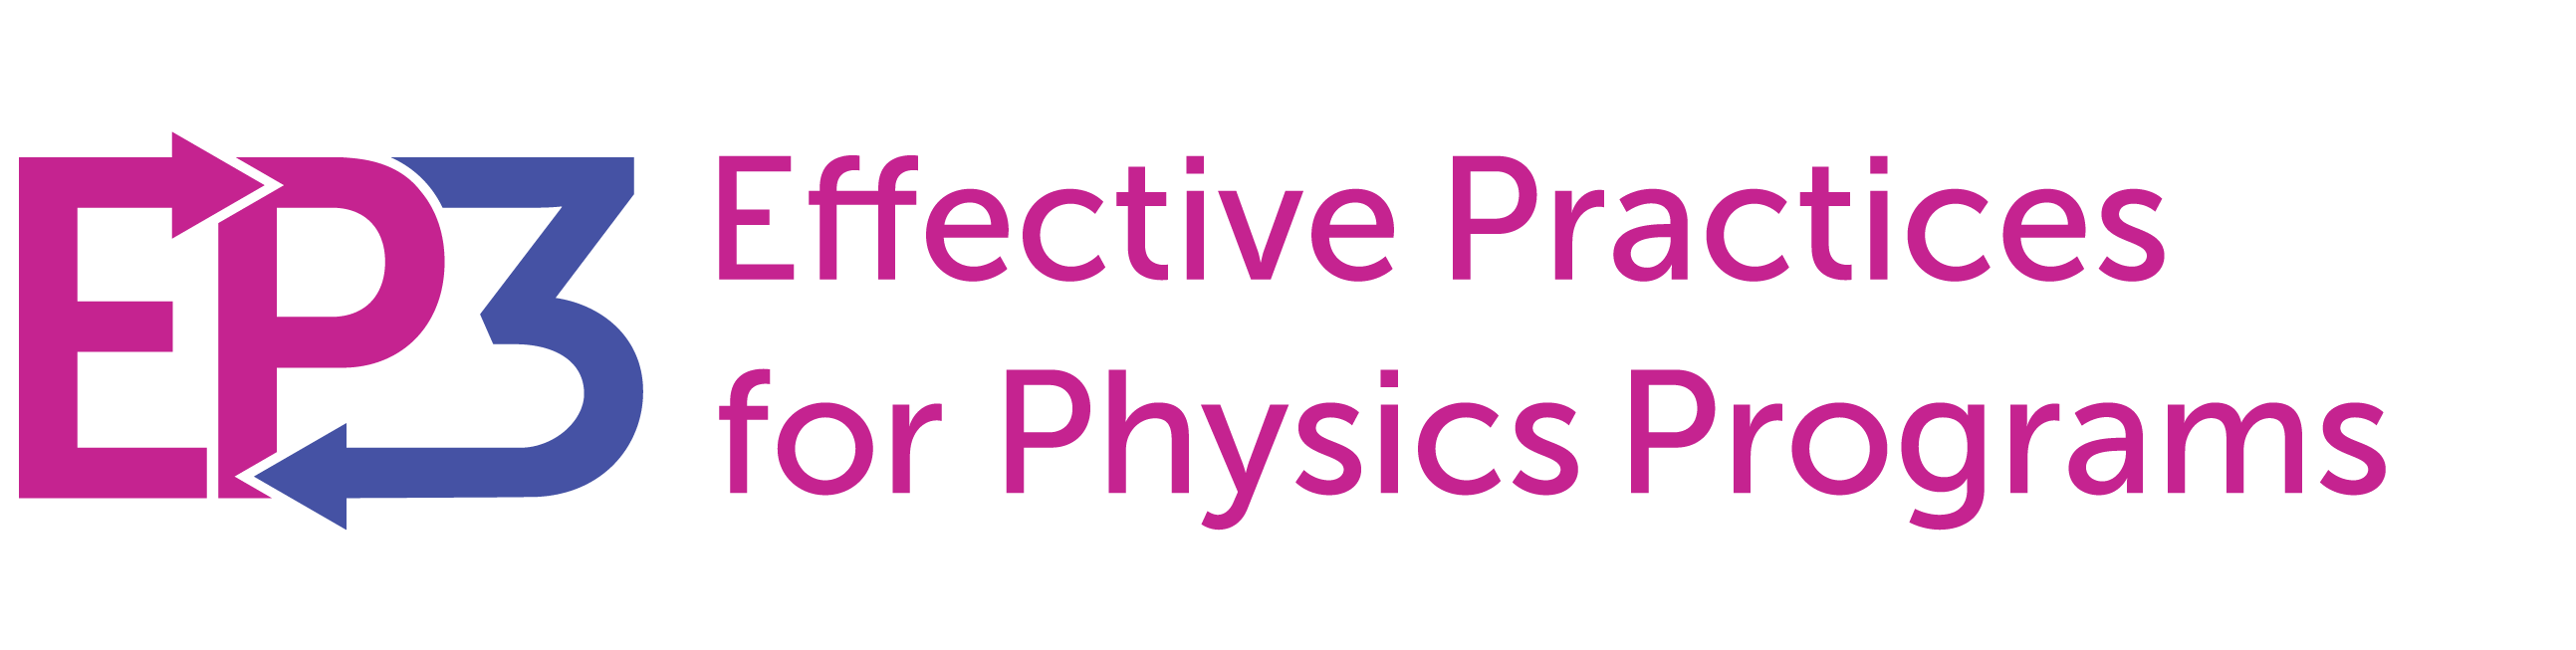 Effective Practices for Physics Programs